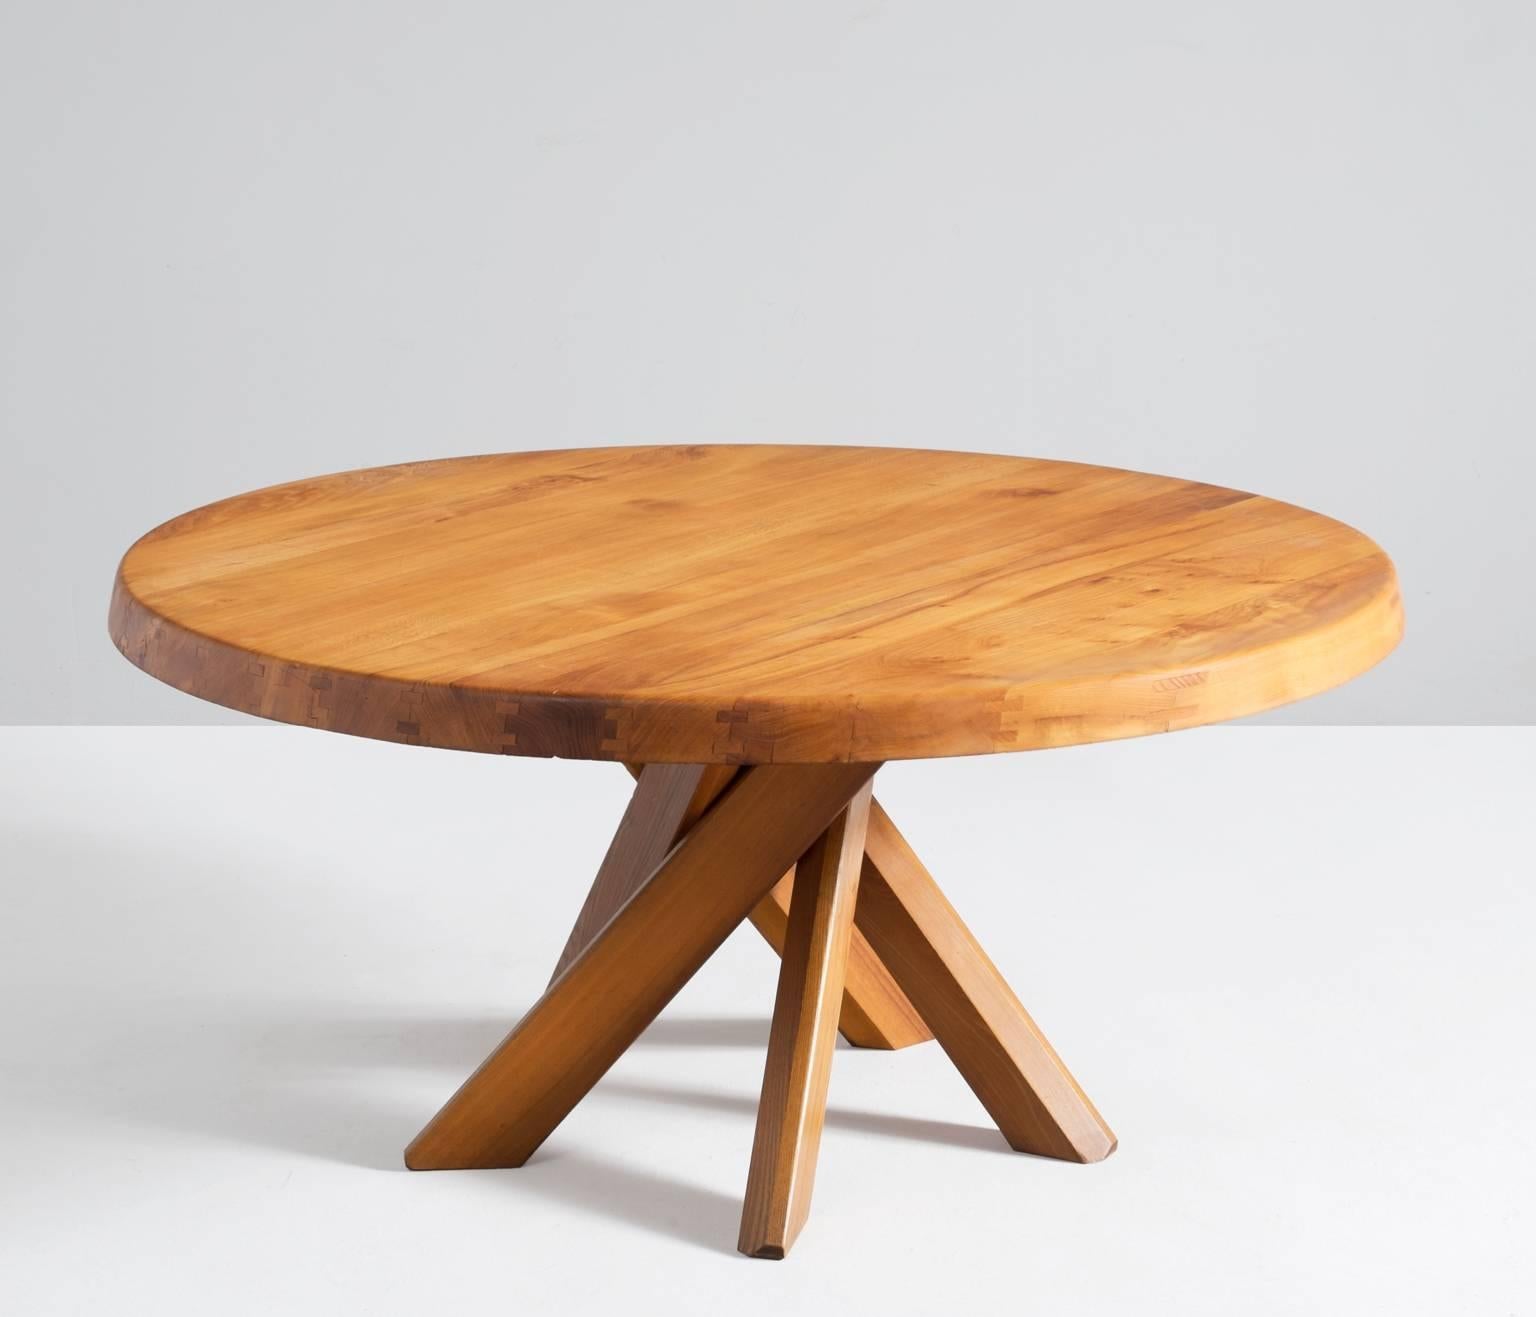 Dining table in elm by Pierre Chapo, France, 1960s.

The shape of the base creates a very open look and makes this an object to make a space more interesting. Well made solid wood joints, also shown on the side of the top with double connection